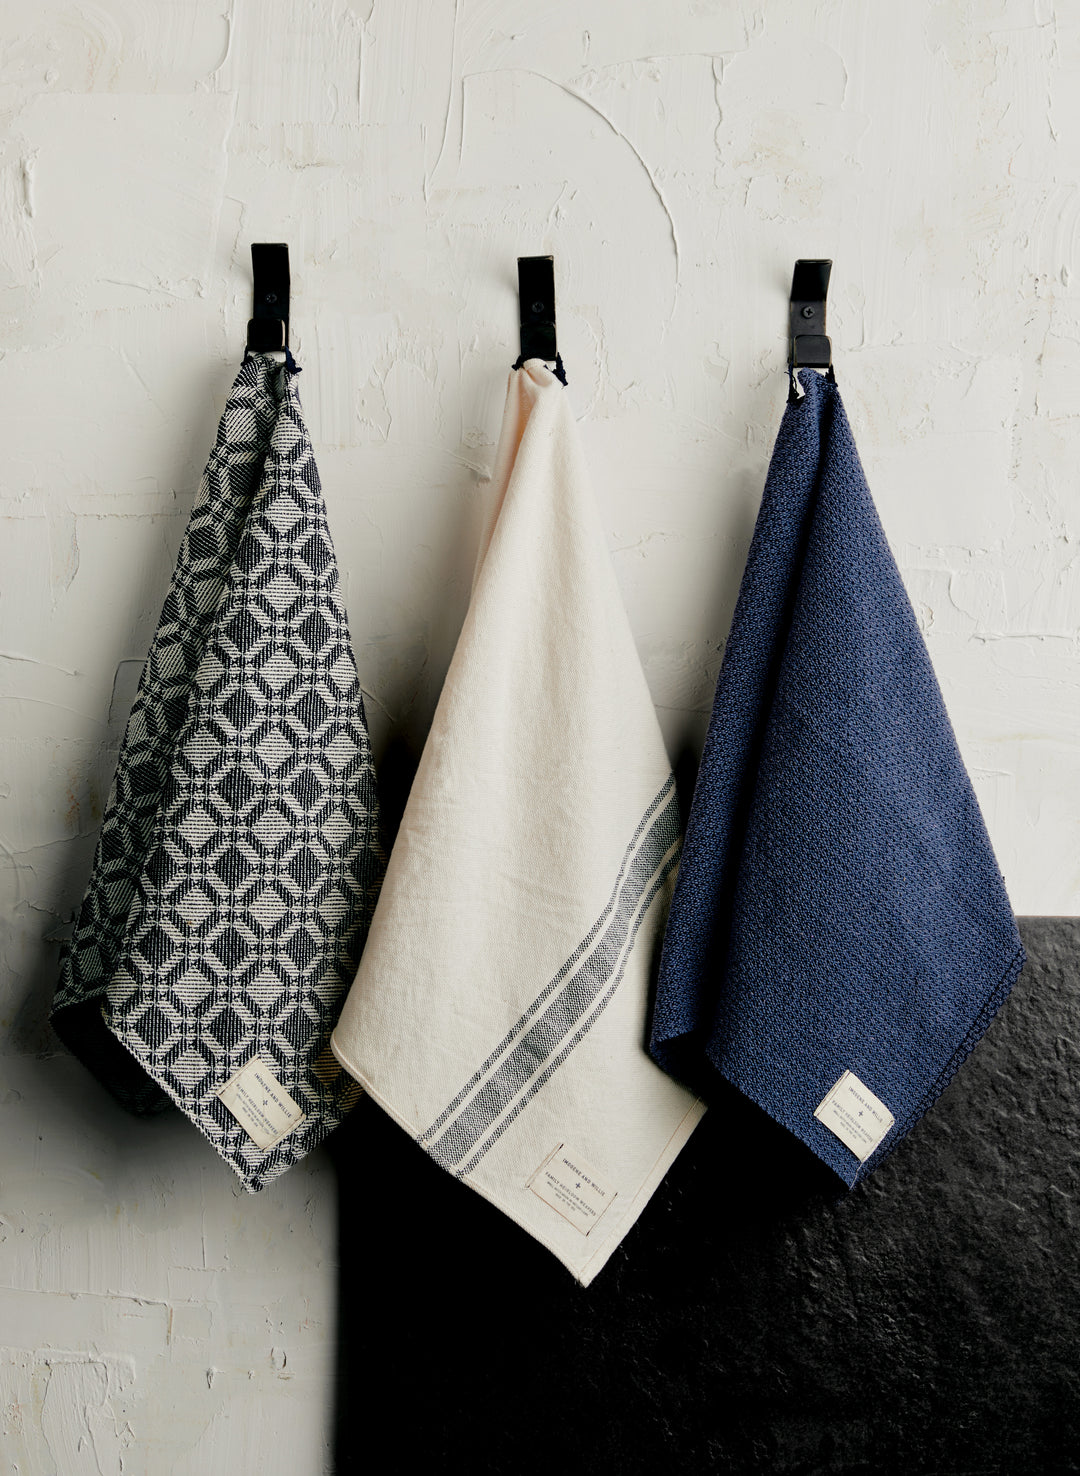  The Weaver's Blend 100% Cotton Kitchen Towels with